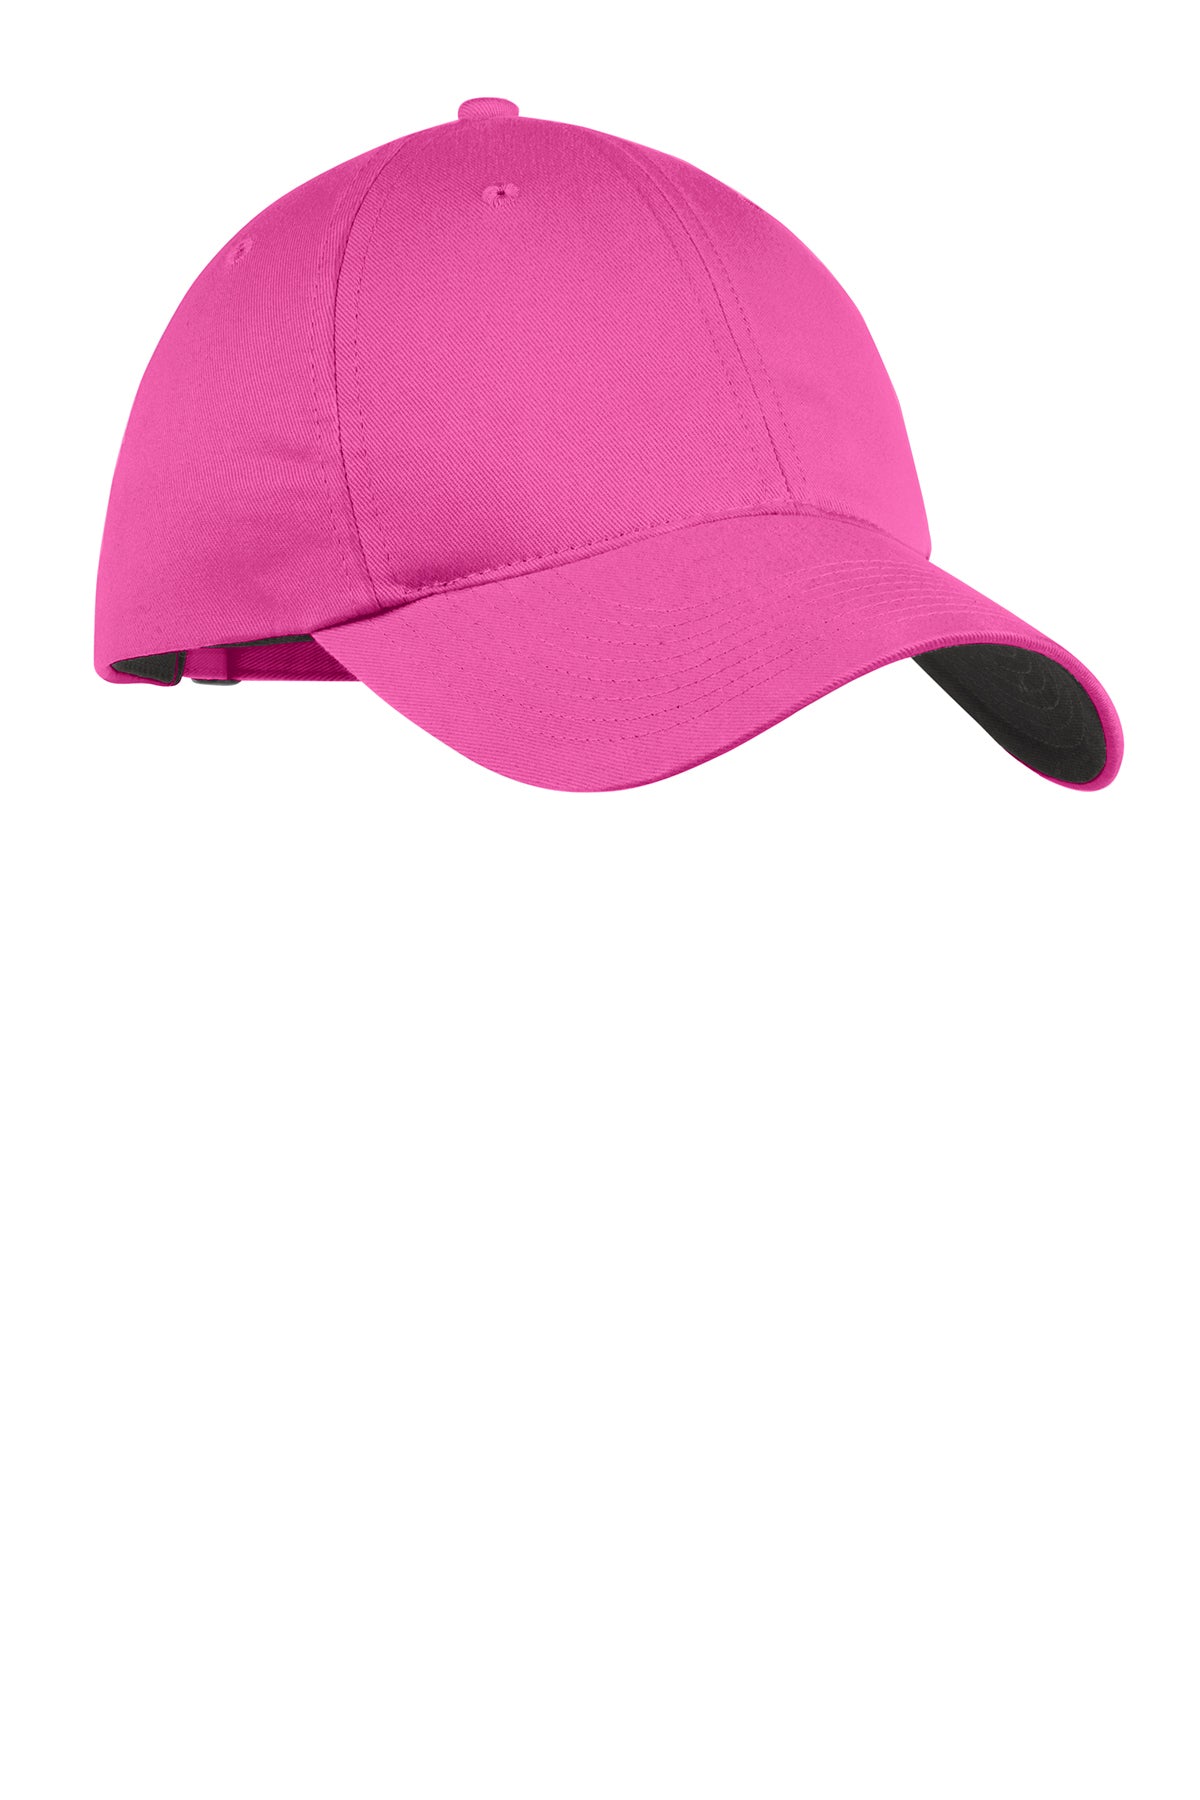 Nike Unstructured Twill Custom Caps, Fusion Pink